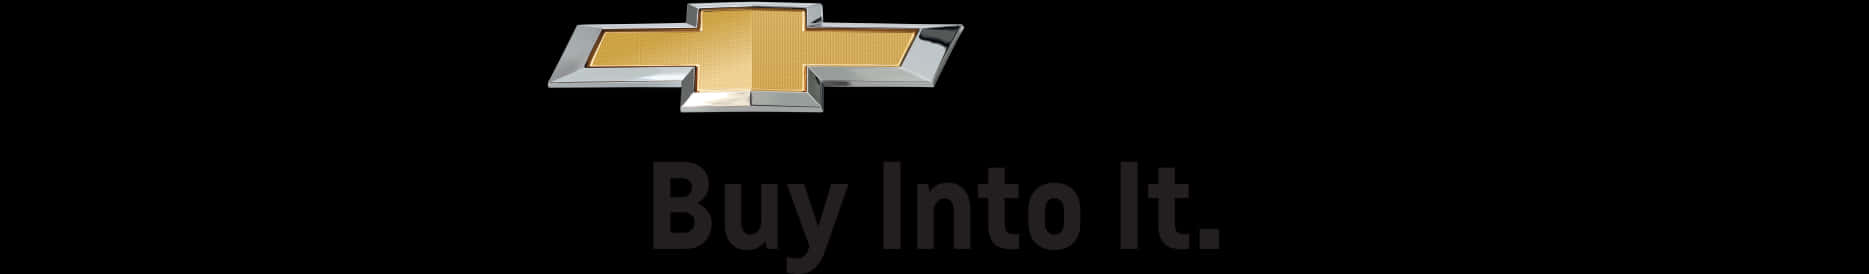 Chevrolet Logowith Slogan